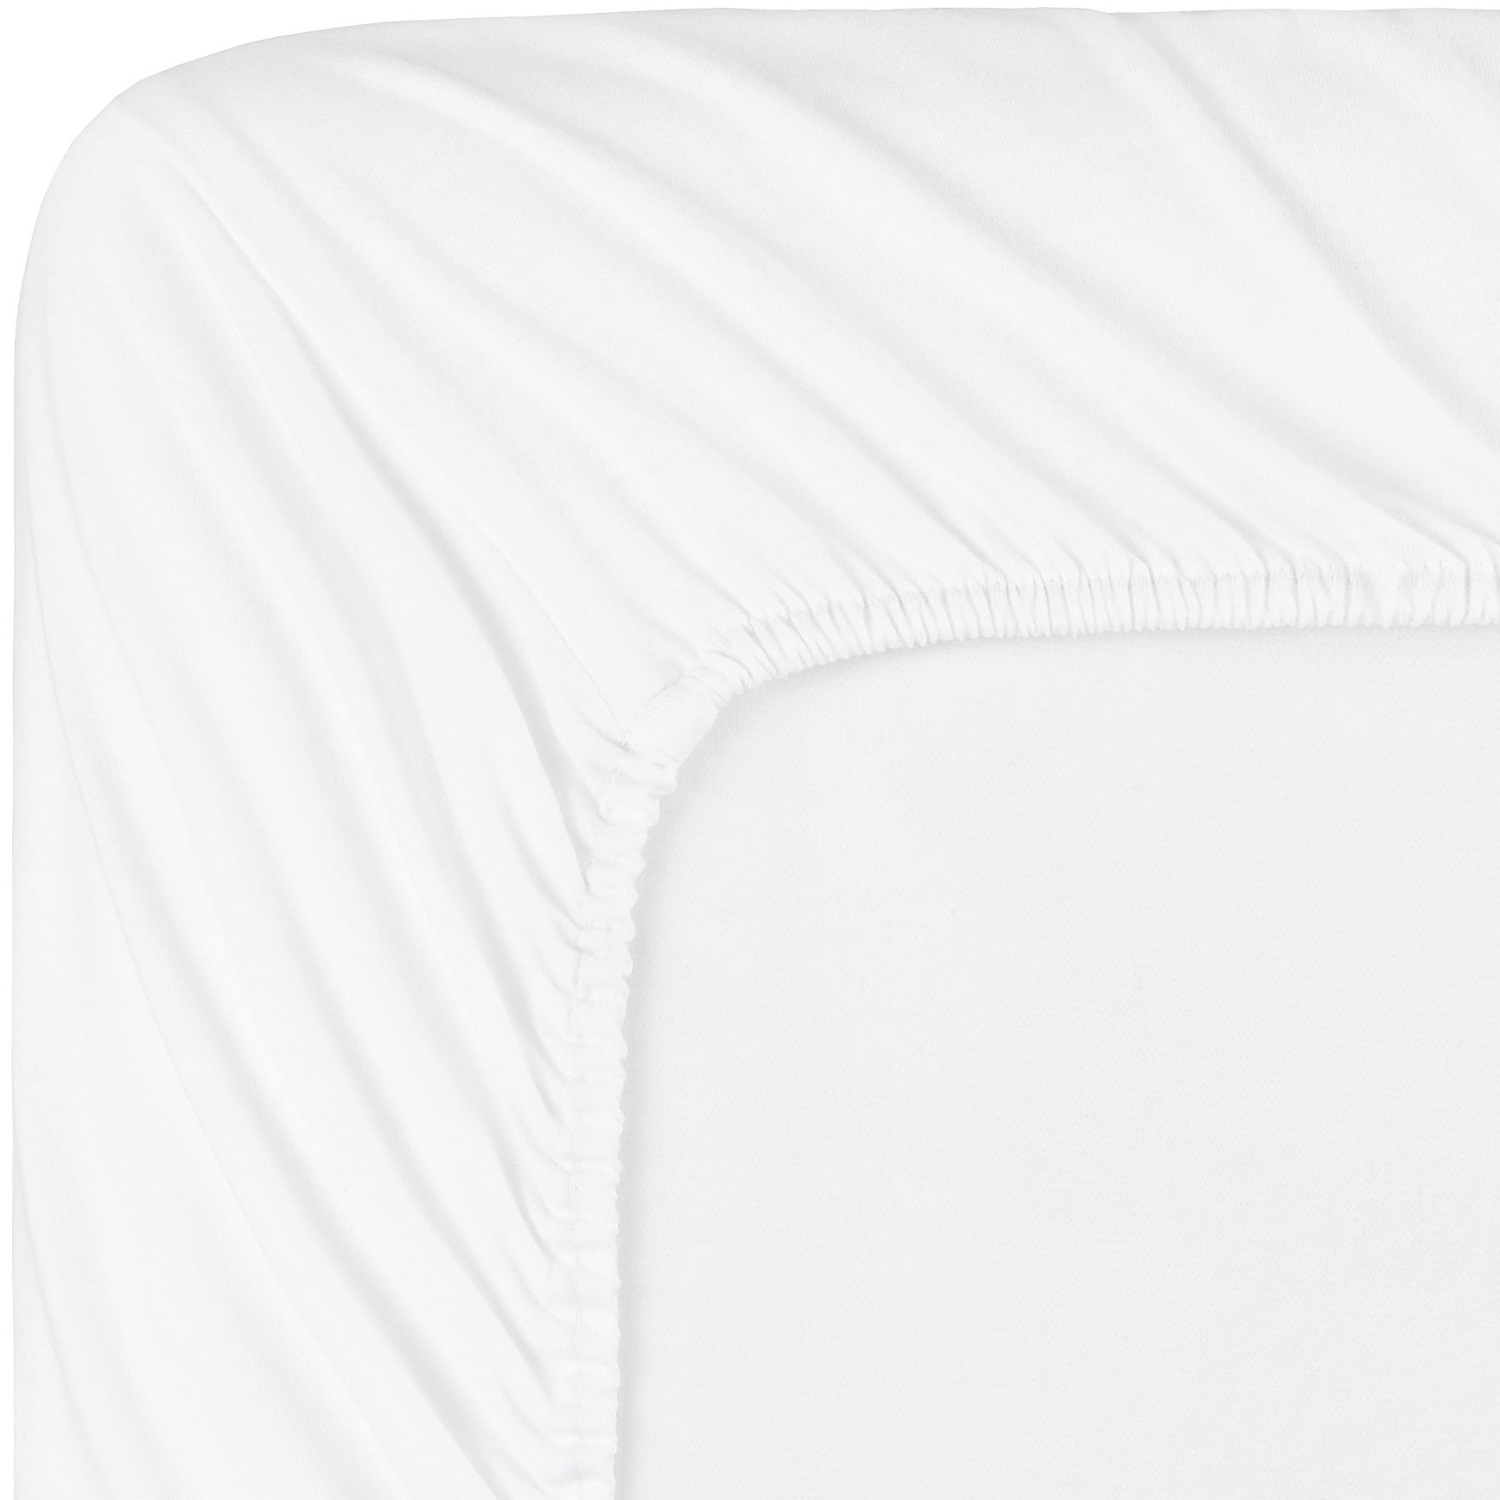 Mellanni Jersey Sheet Set 4 Piece 100% Cotton Deep Pocket Bed Sheets and Pillowcases, Queen, White - image 4 of 9